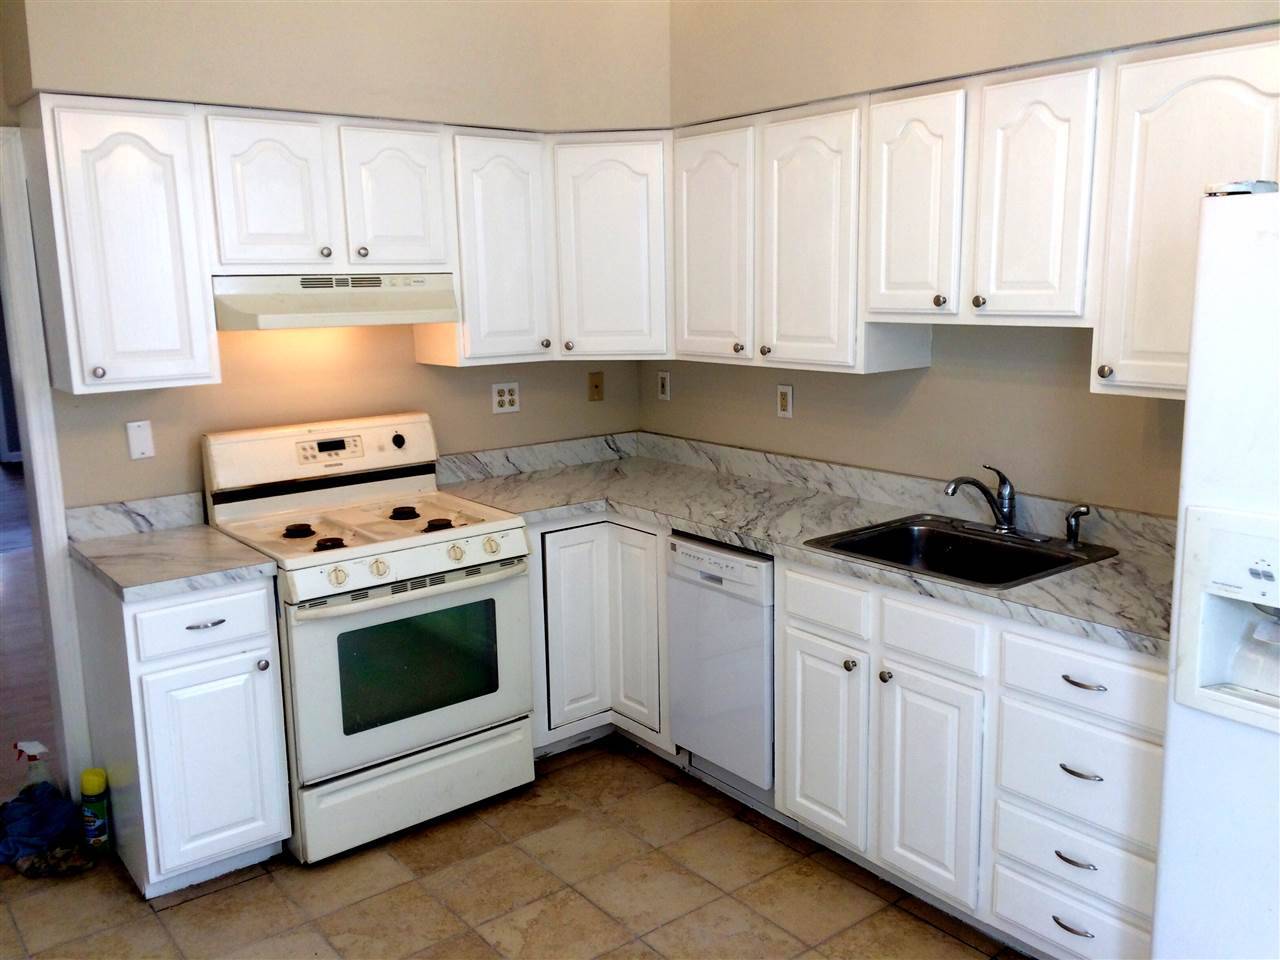 **INCLUDES HEAT & HOT WATER** Available NOW - 2 BR New Jersey